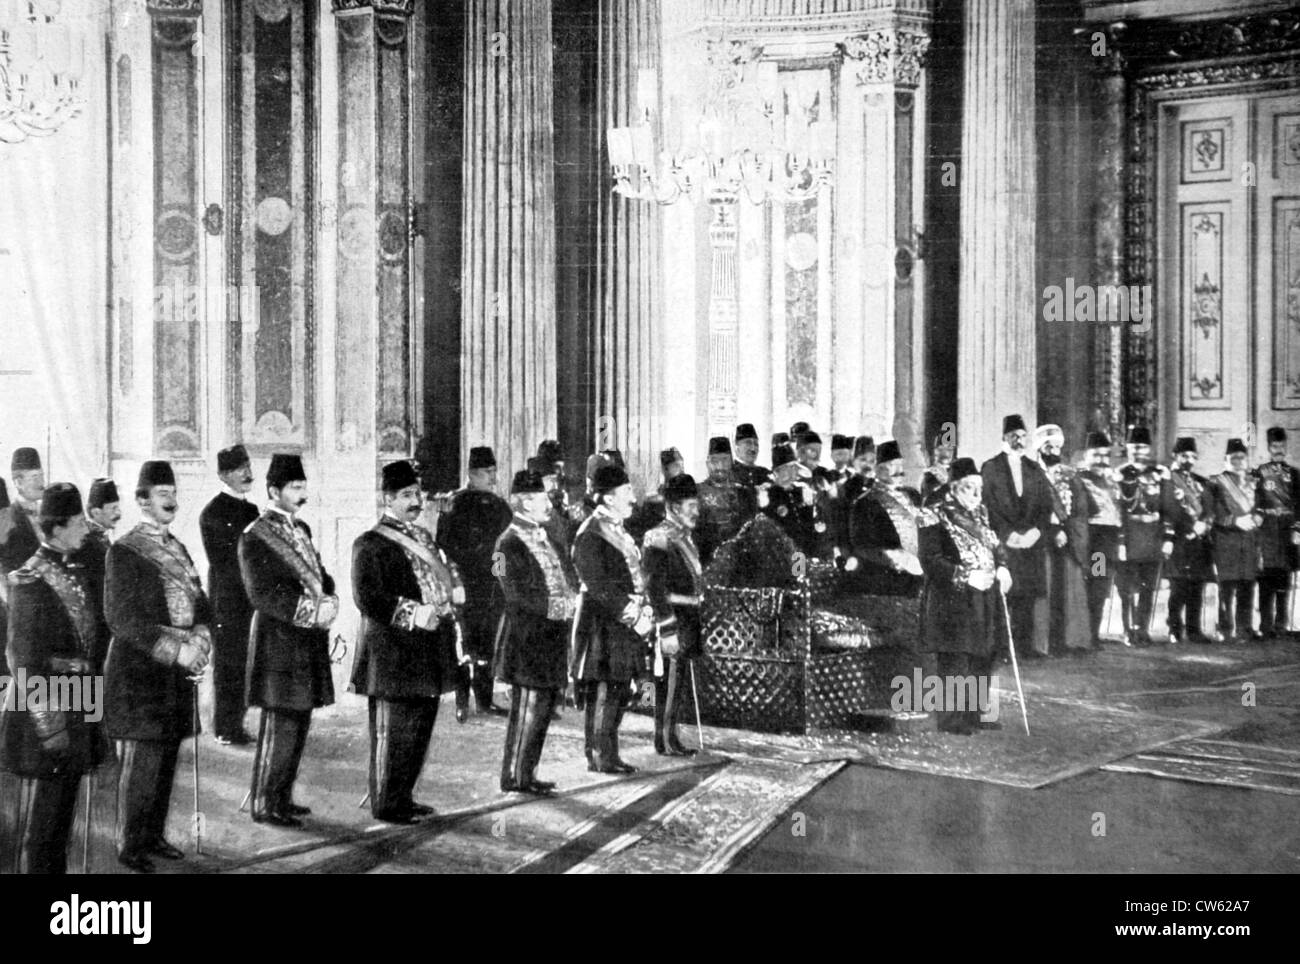 Sultan Mehmed V during a ceremony at the Dolma-Baghtche Palace in Constantinople, 1911. Stock Photo